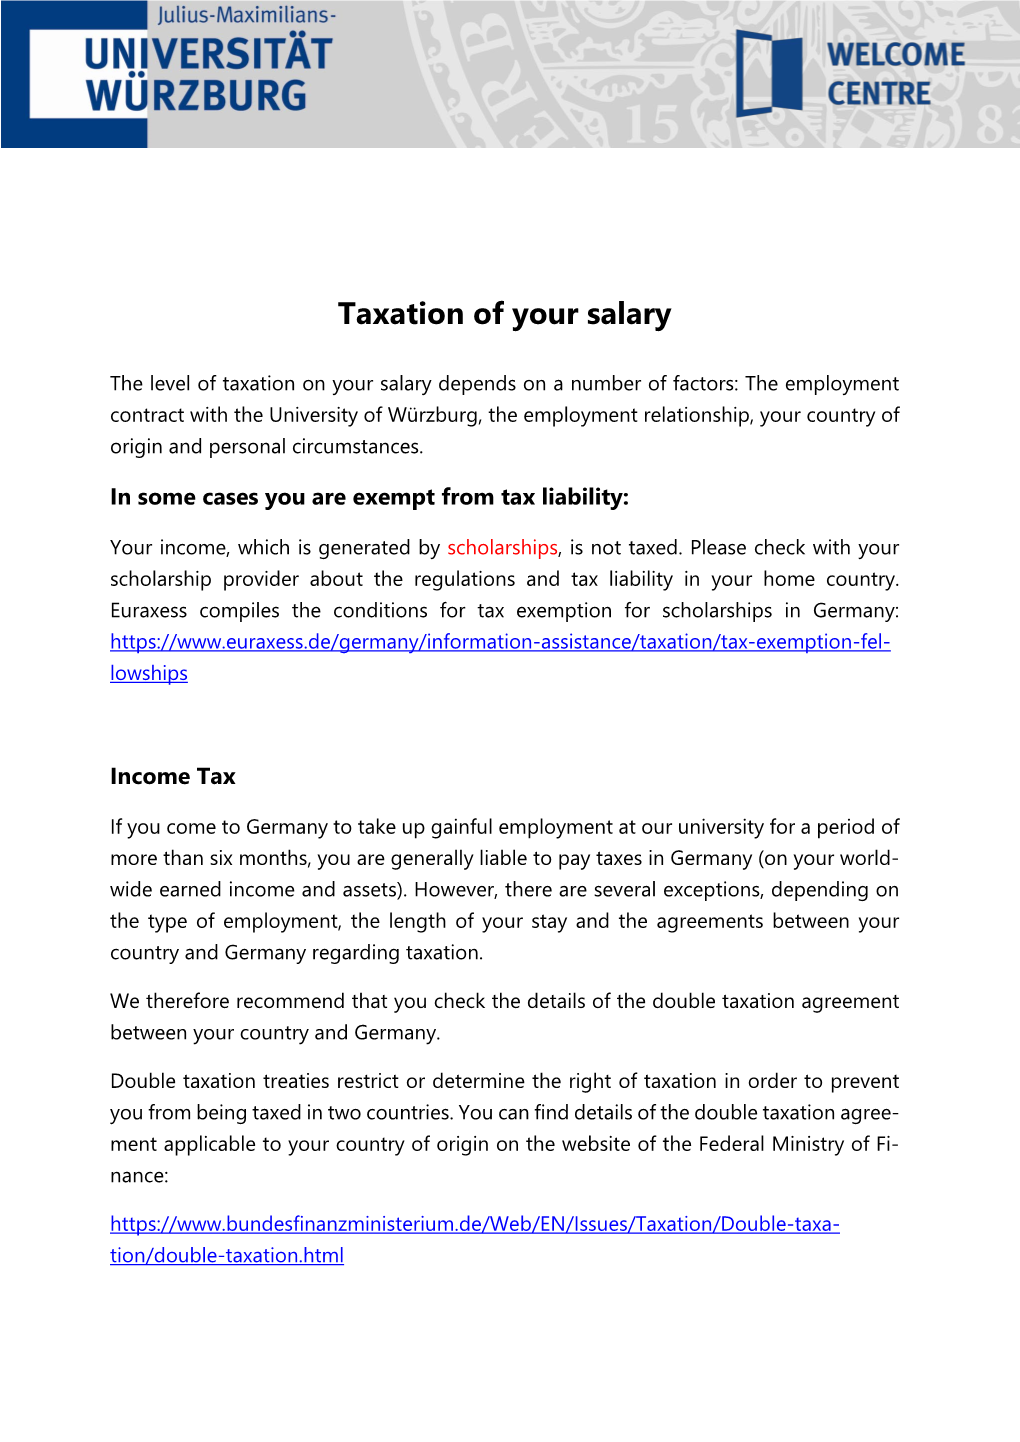 Taxation of Your Salary